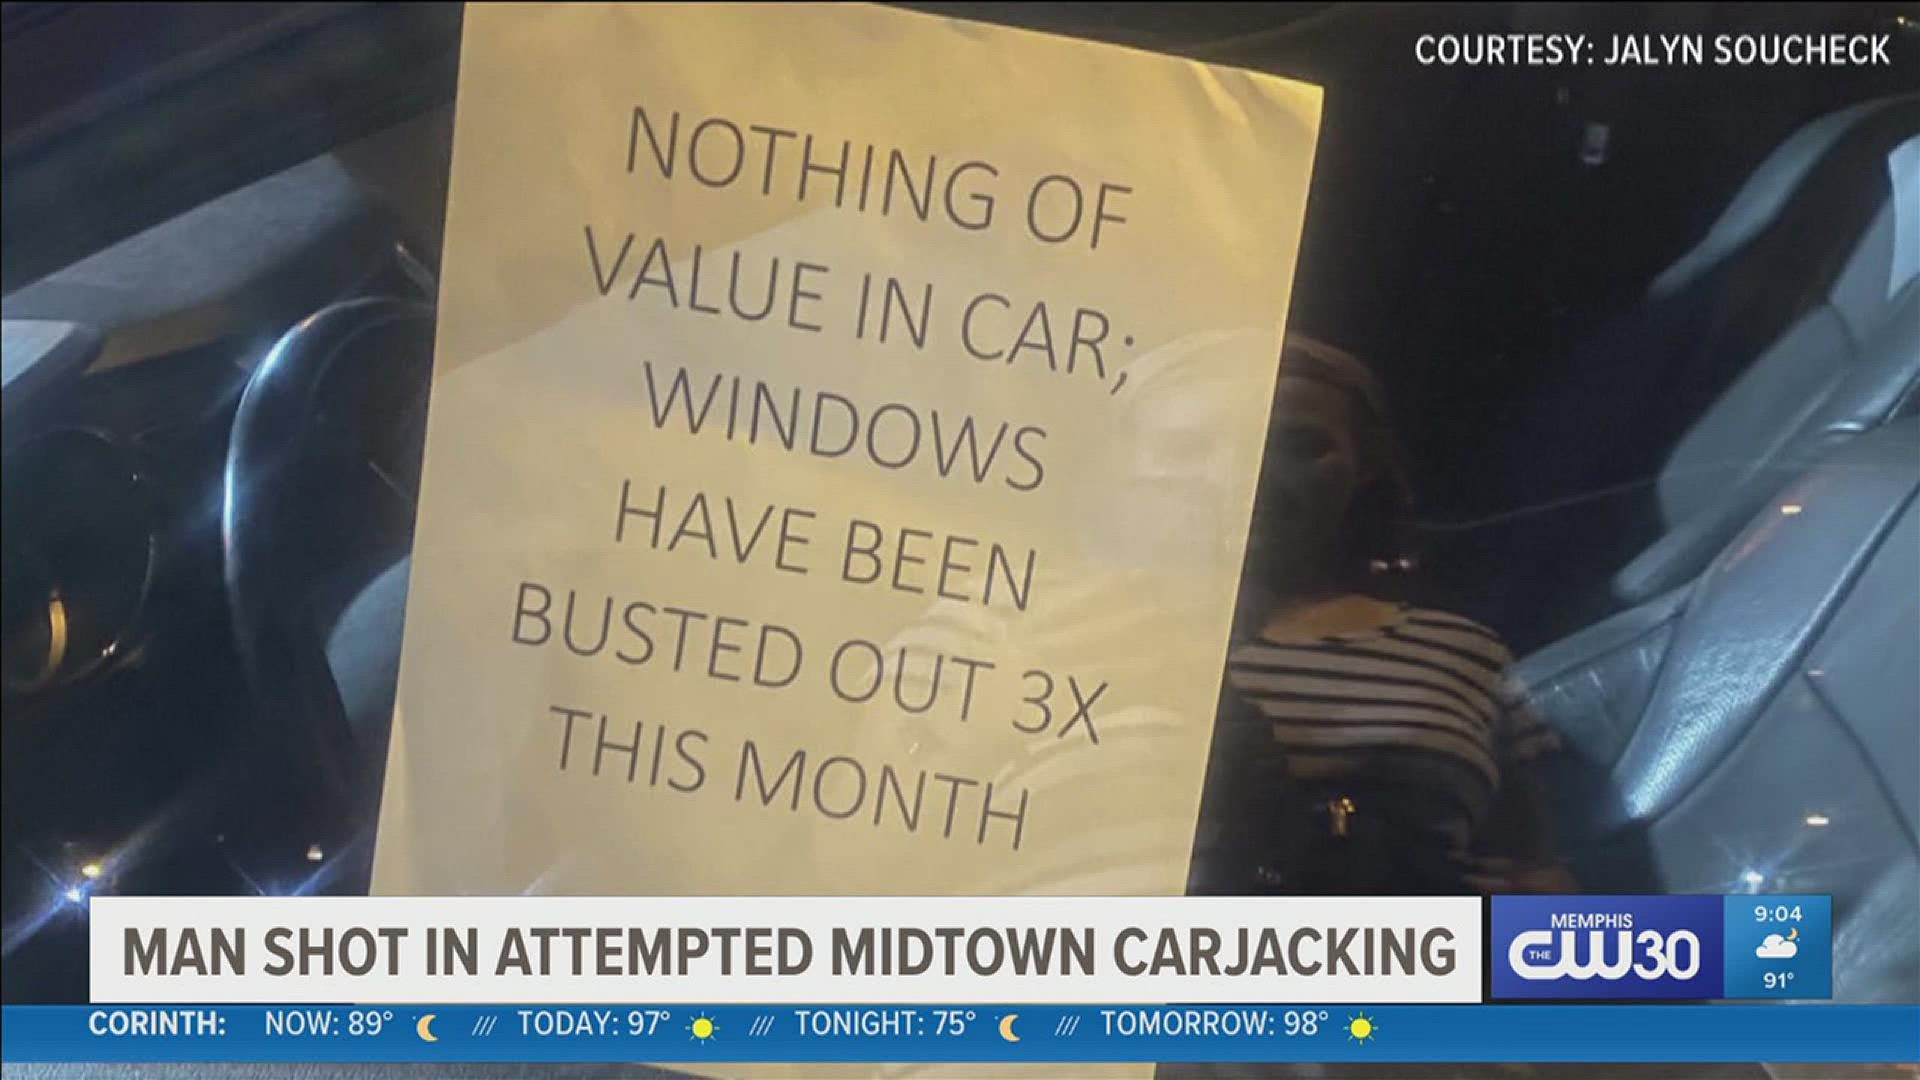 The problem has gotten so bad, some car owners are leaving signs in their windows pleading with bad guys not to break-in.